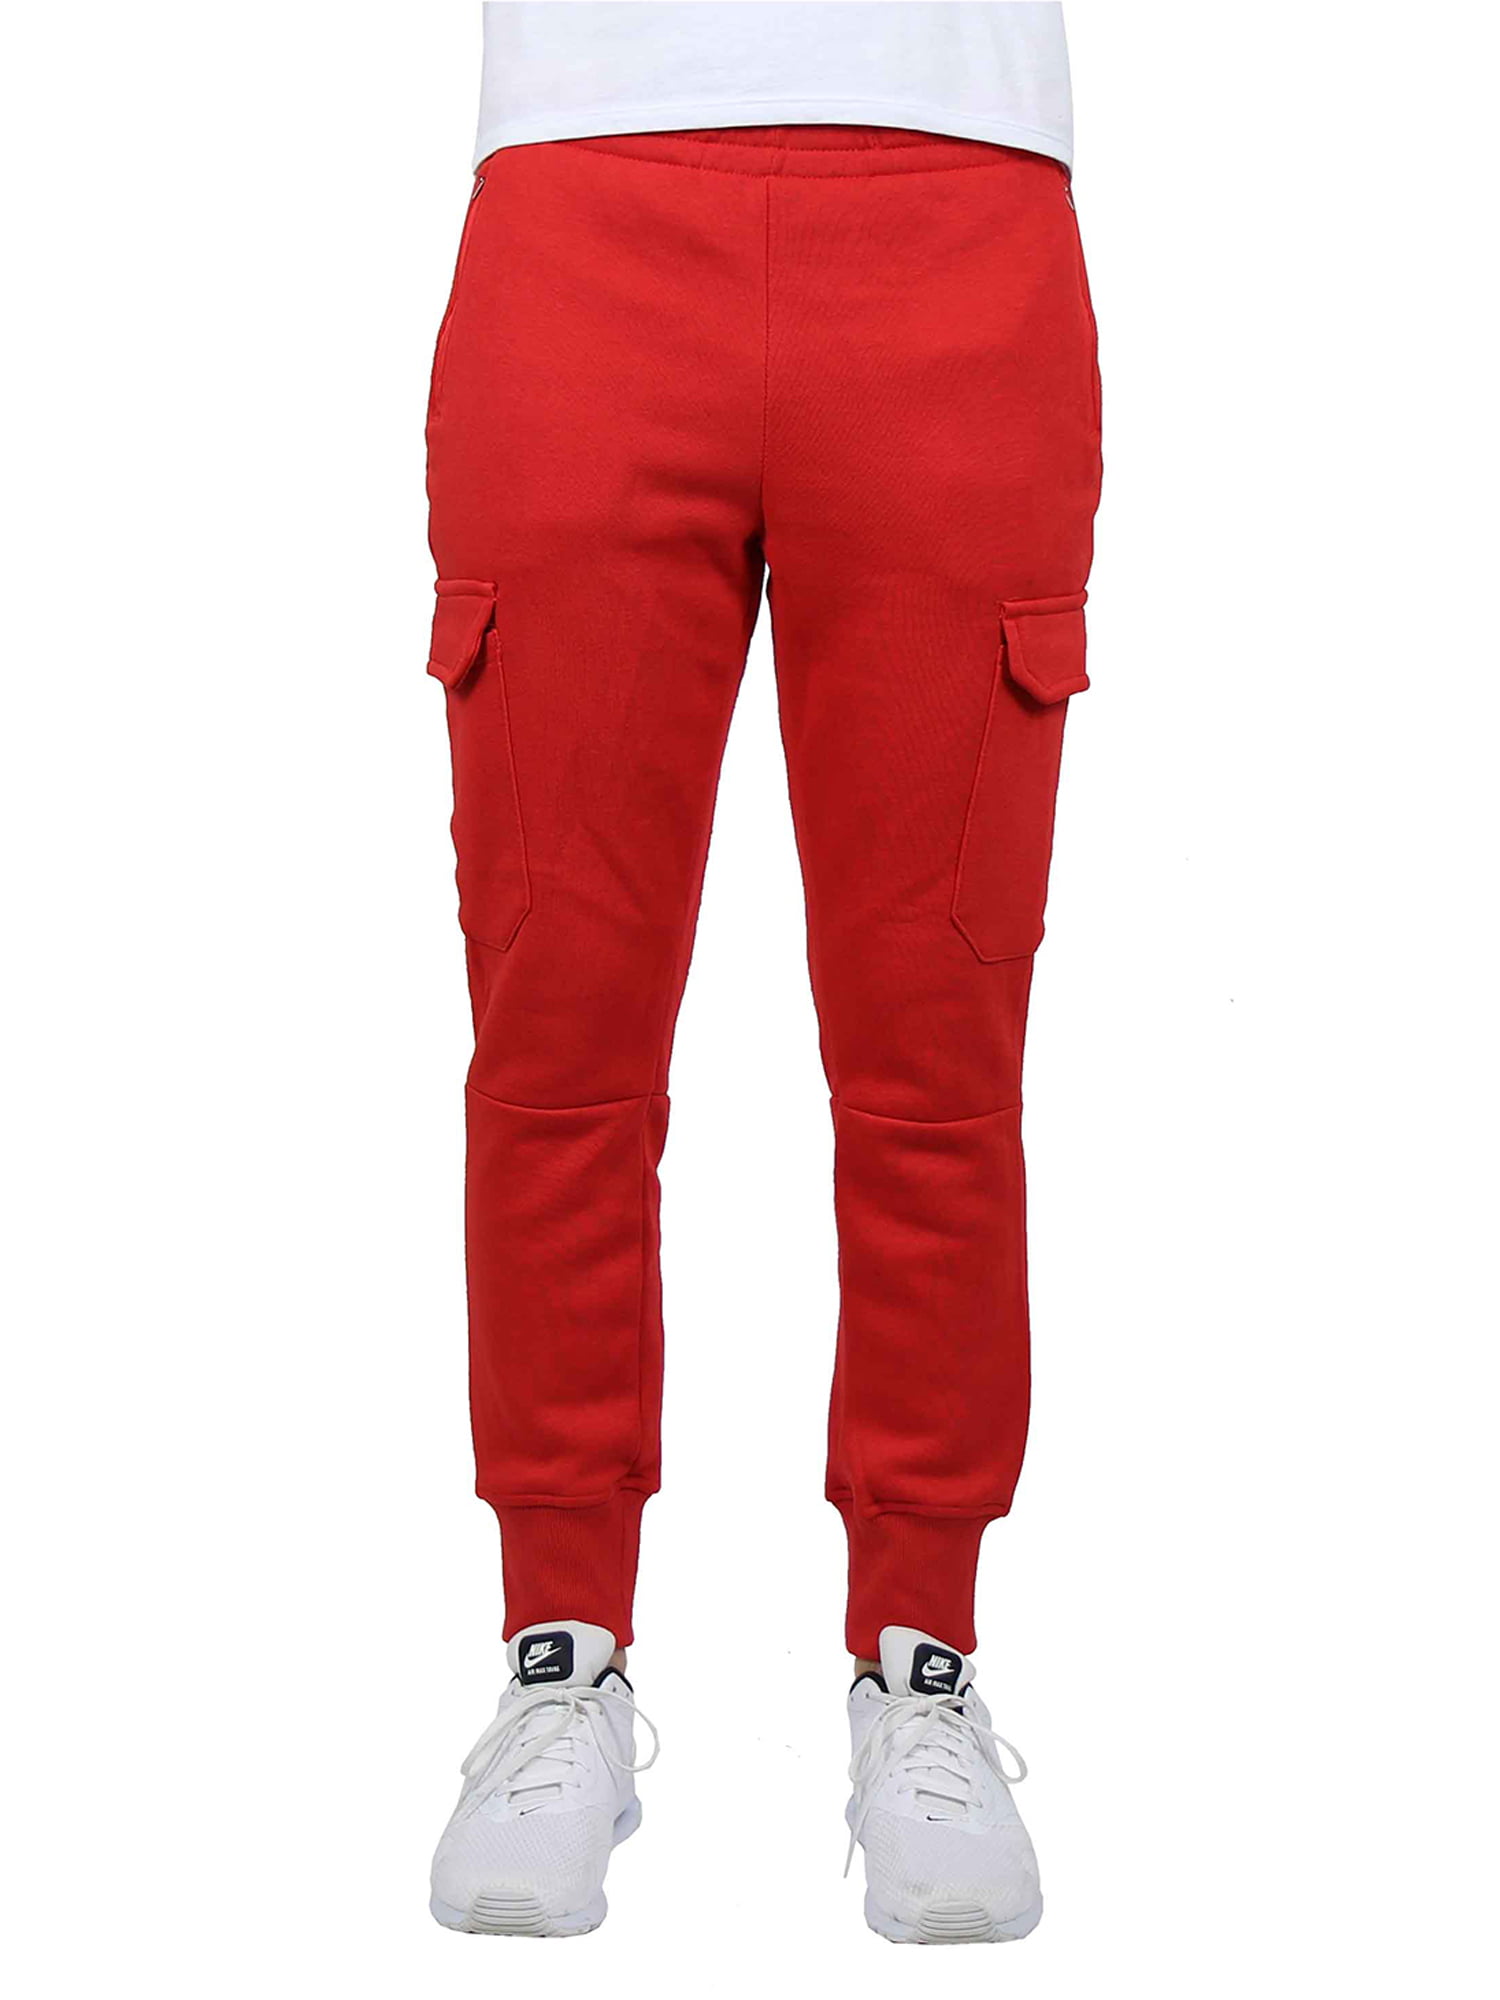 mens red stretch jeans